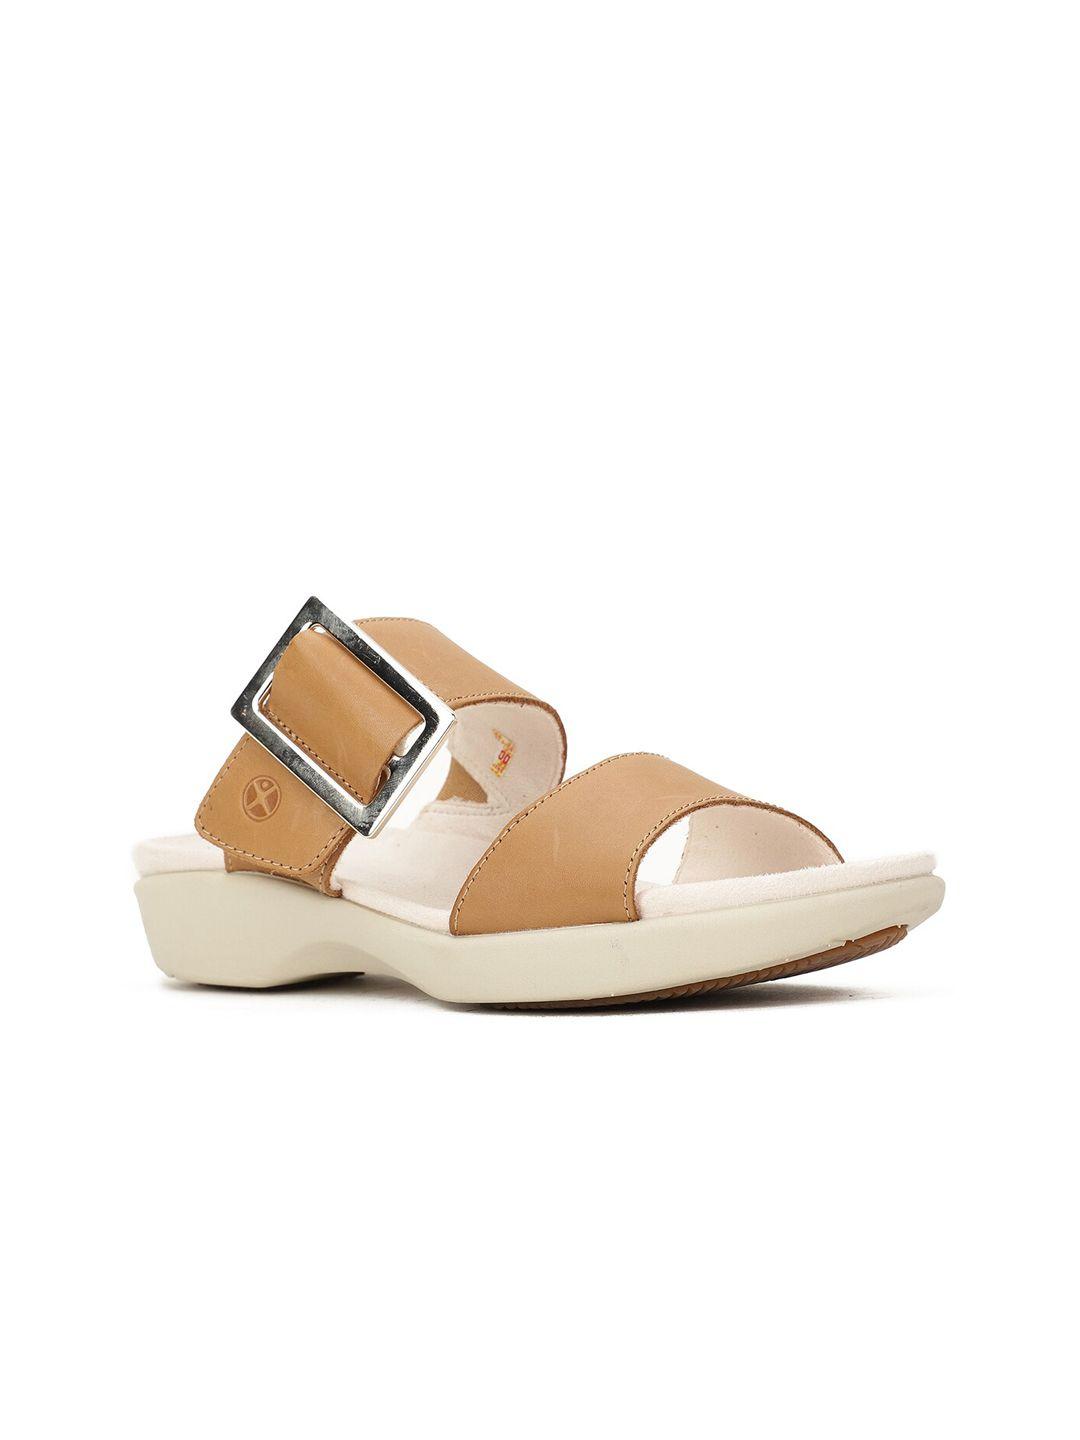 hush-puppies-women-open-toe-flats-with-buckles